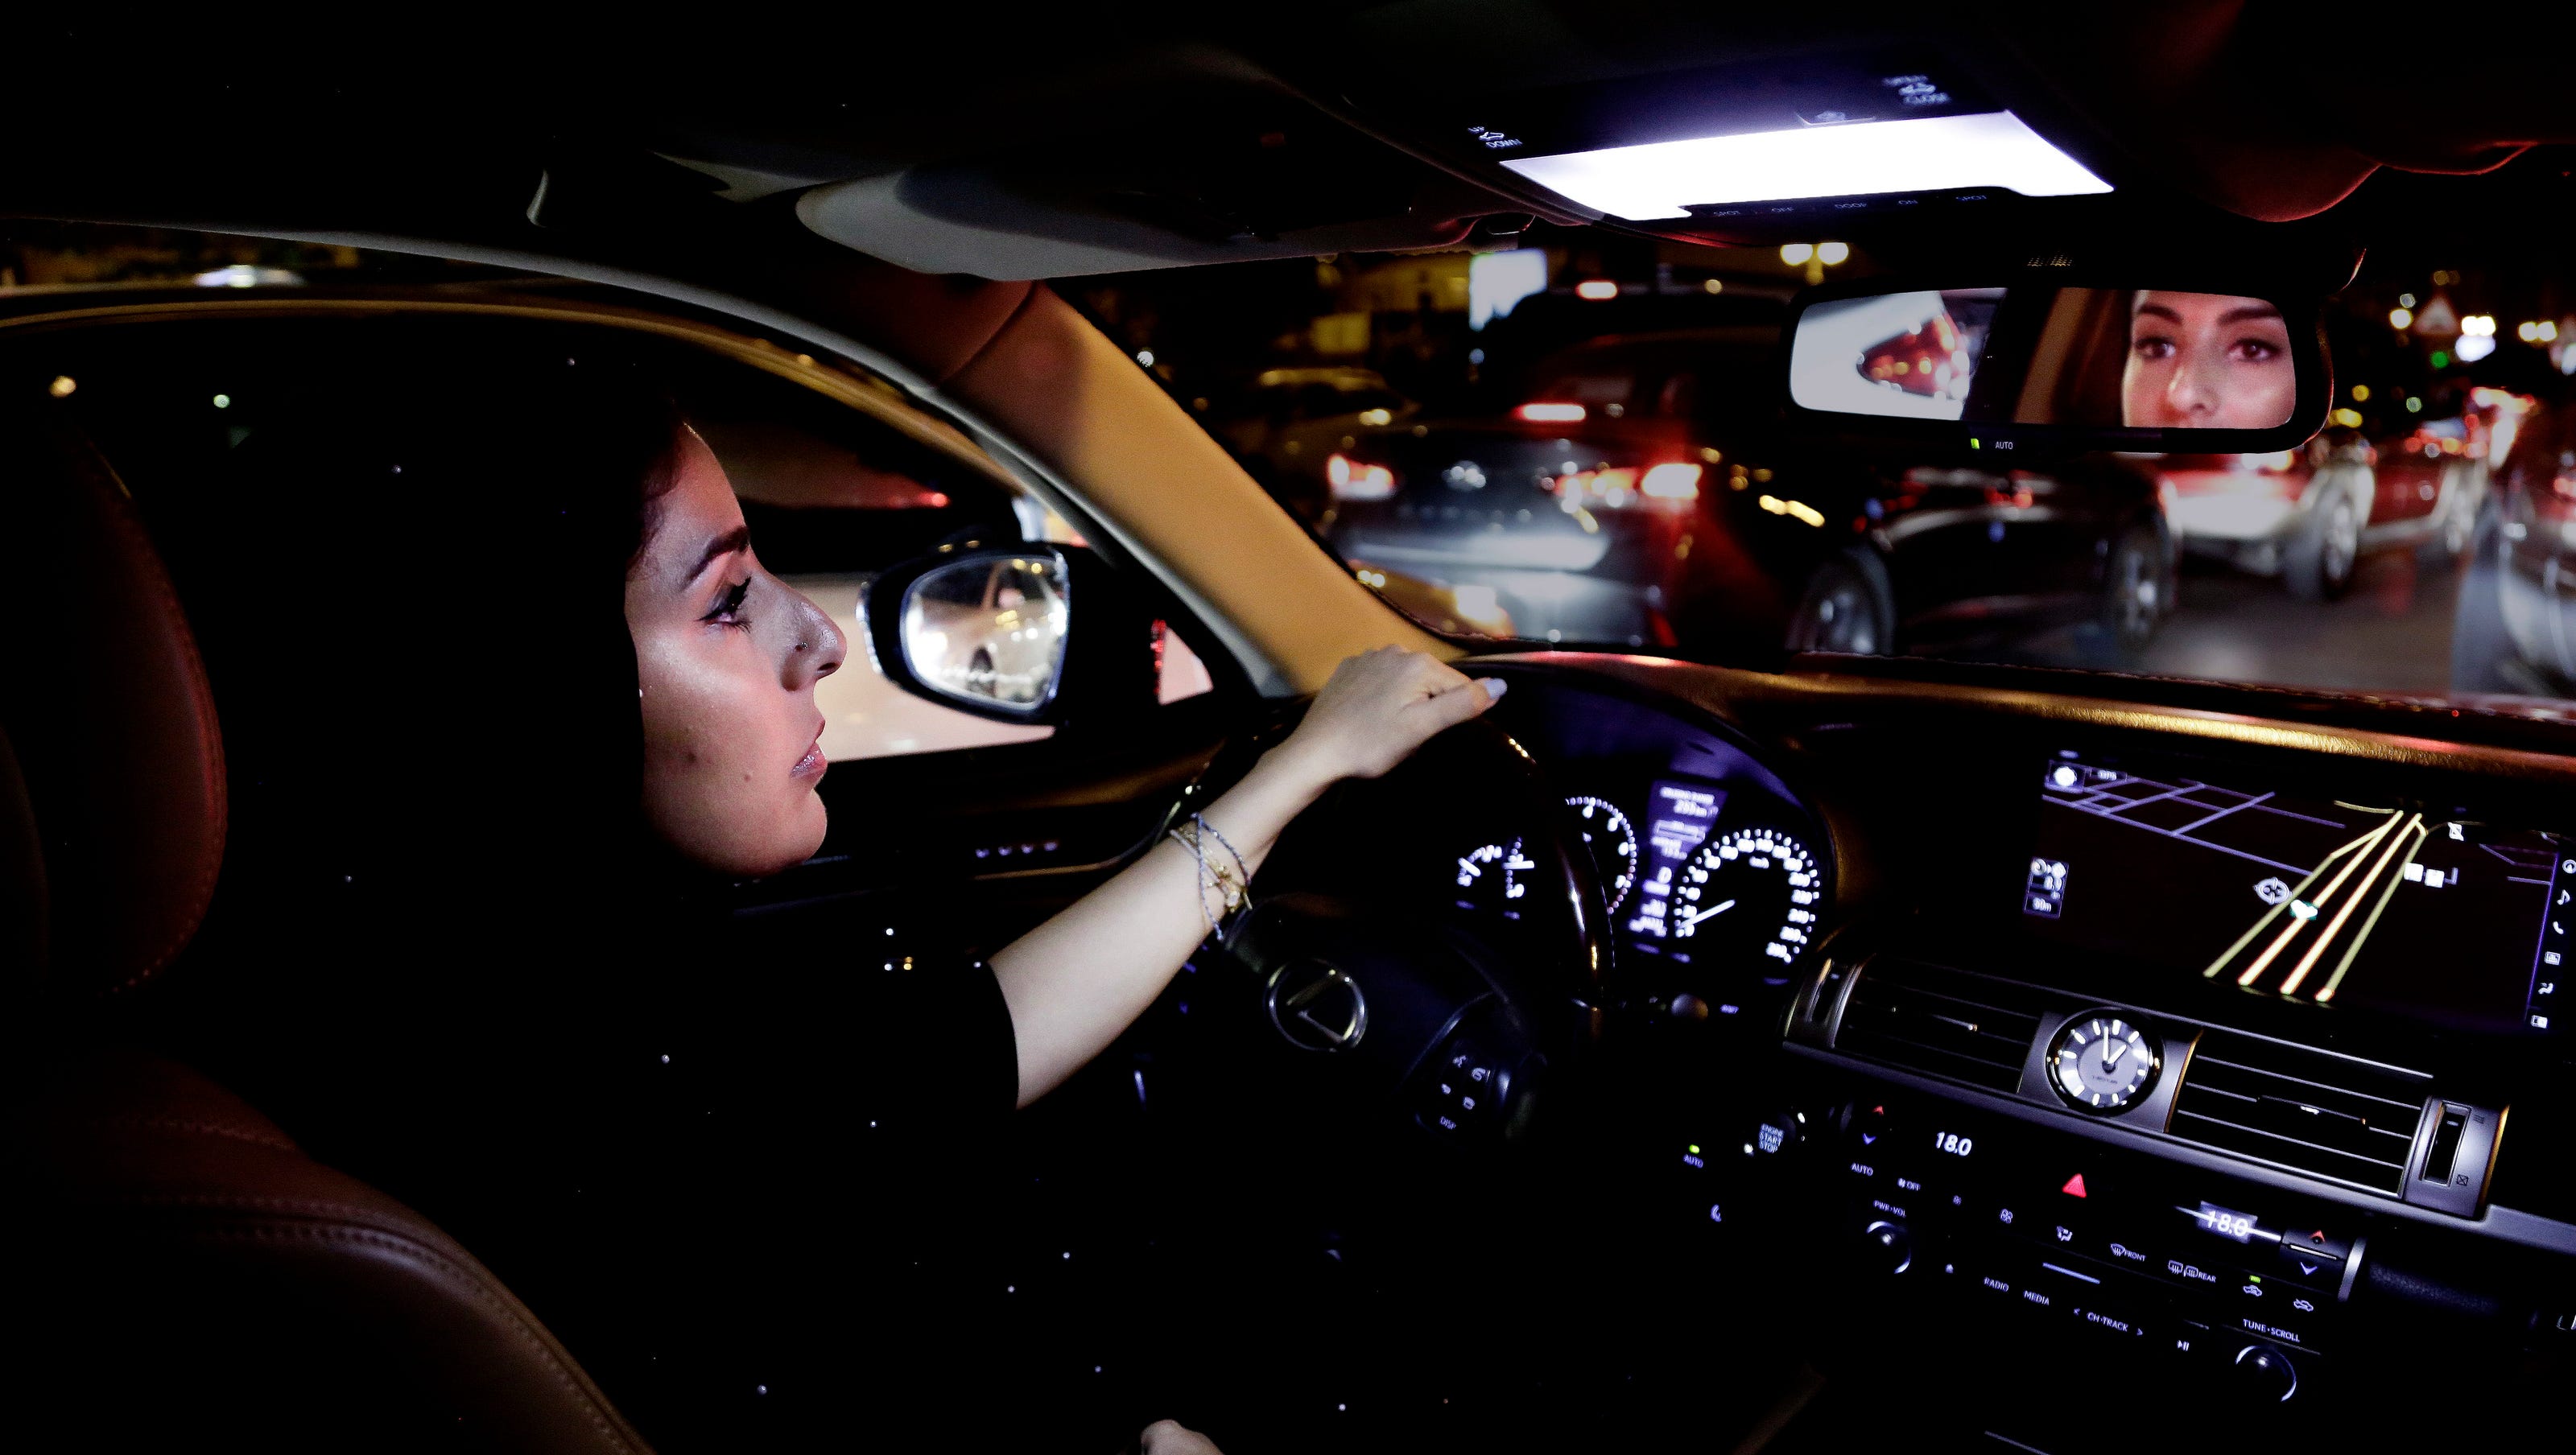 Women in Saudi Arabia finally hit the road as longtime driving ban ends